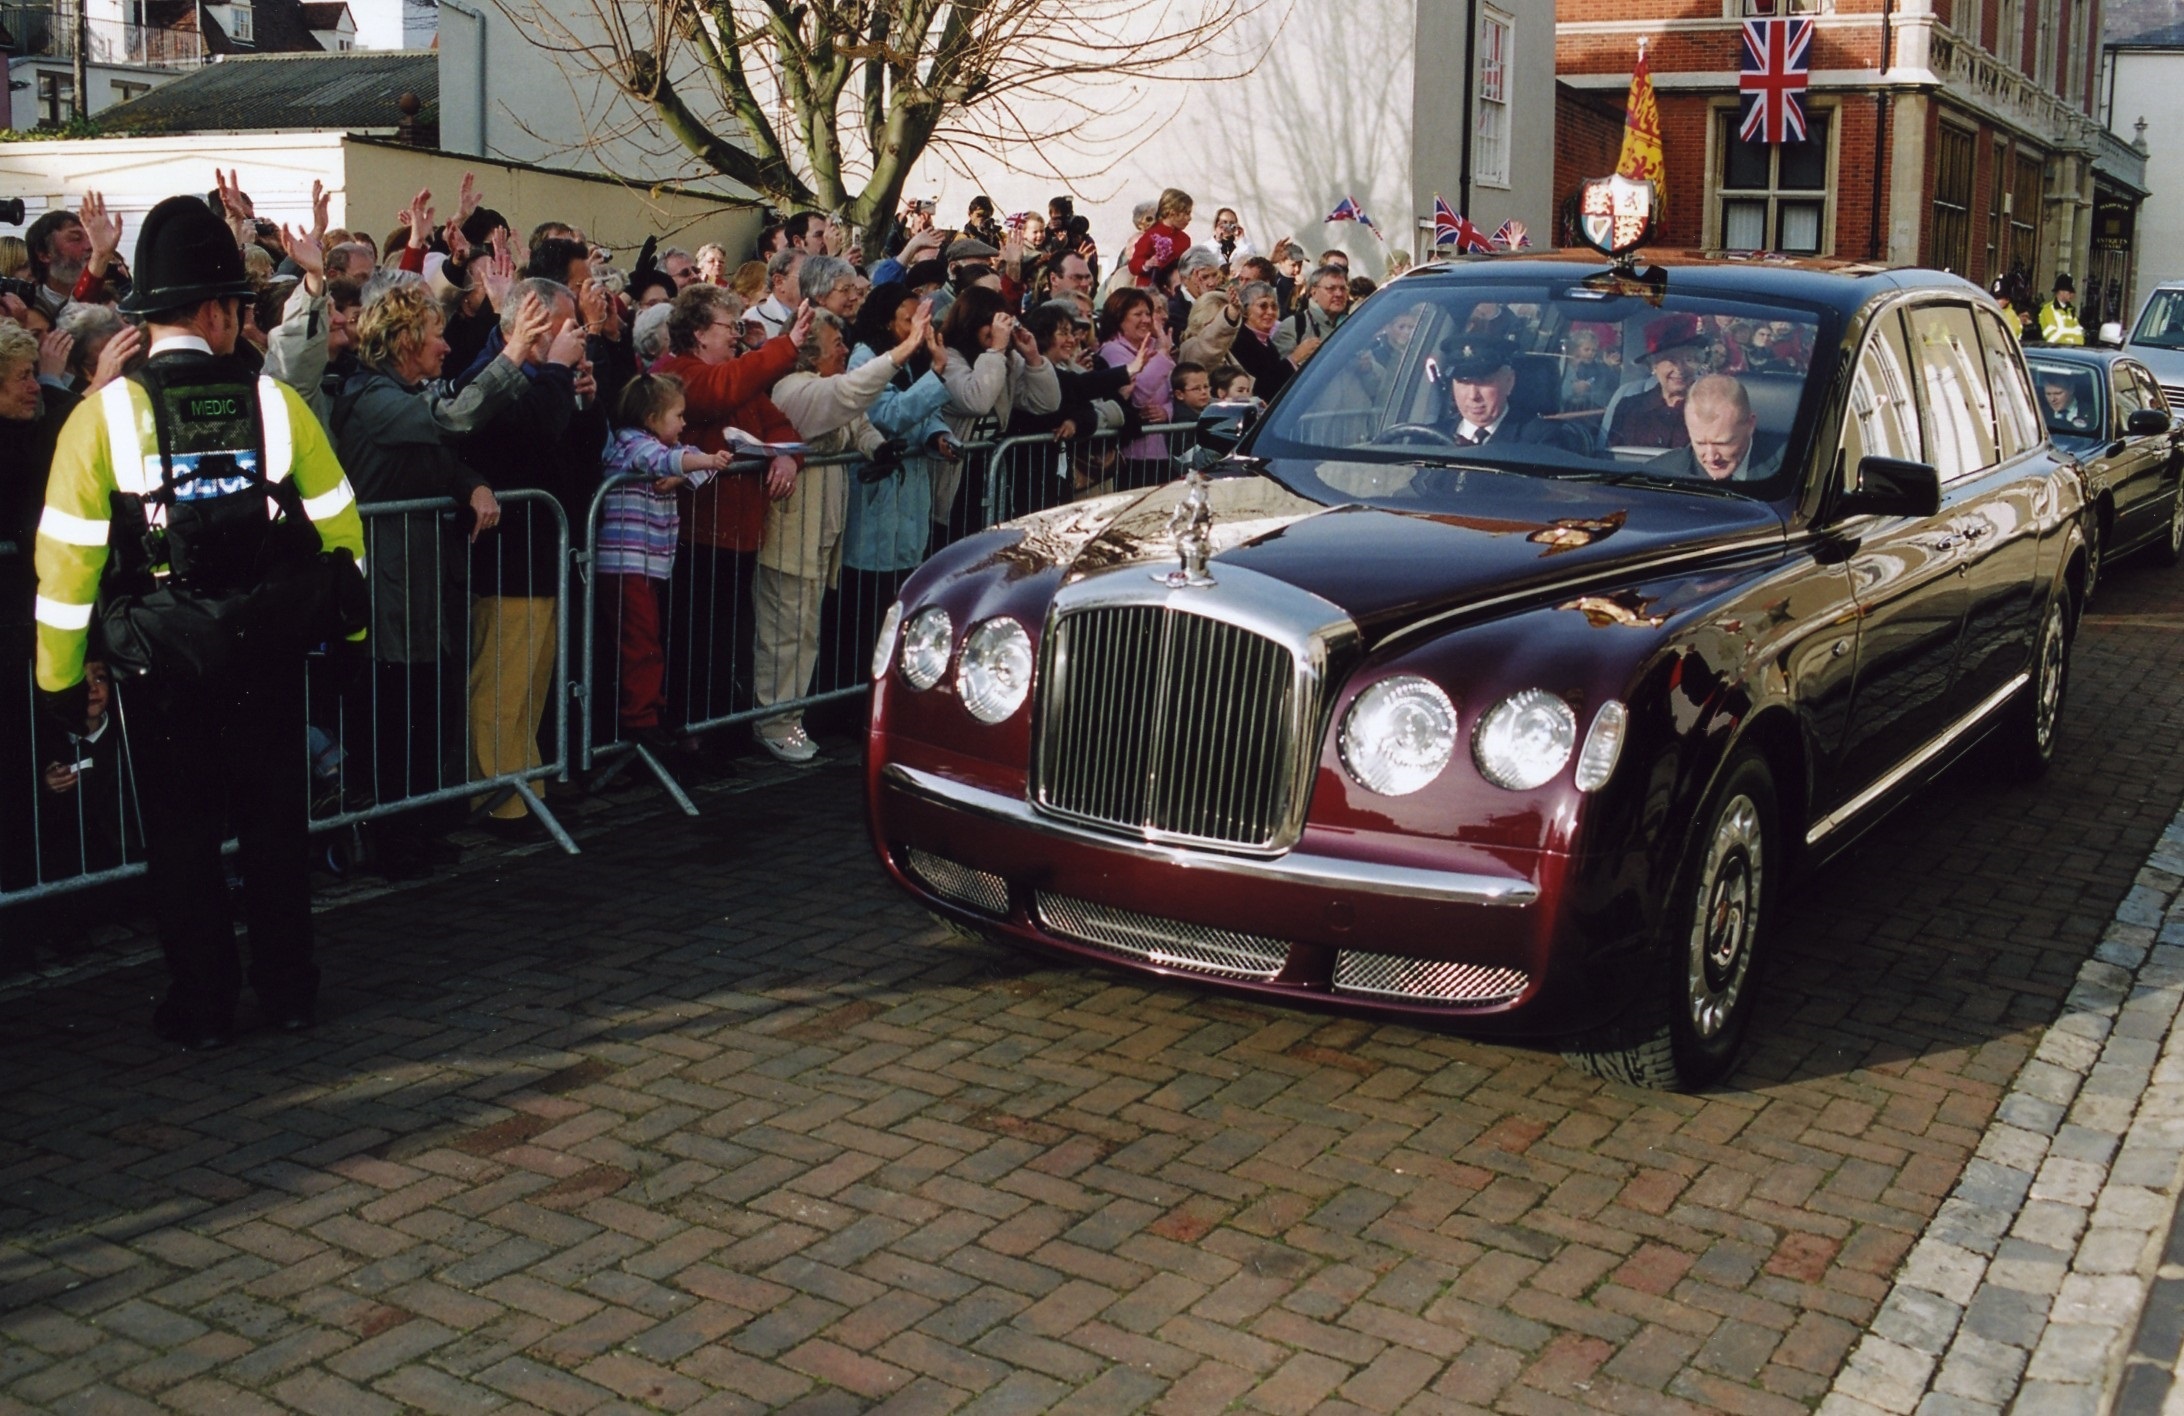 Welcome - crowds gathered as the Queen and Prince Philip were driven through Harwich.